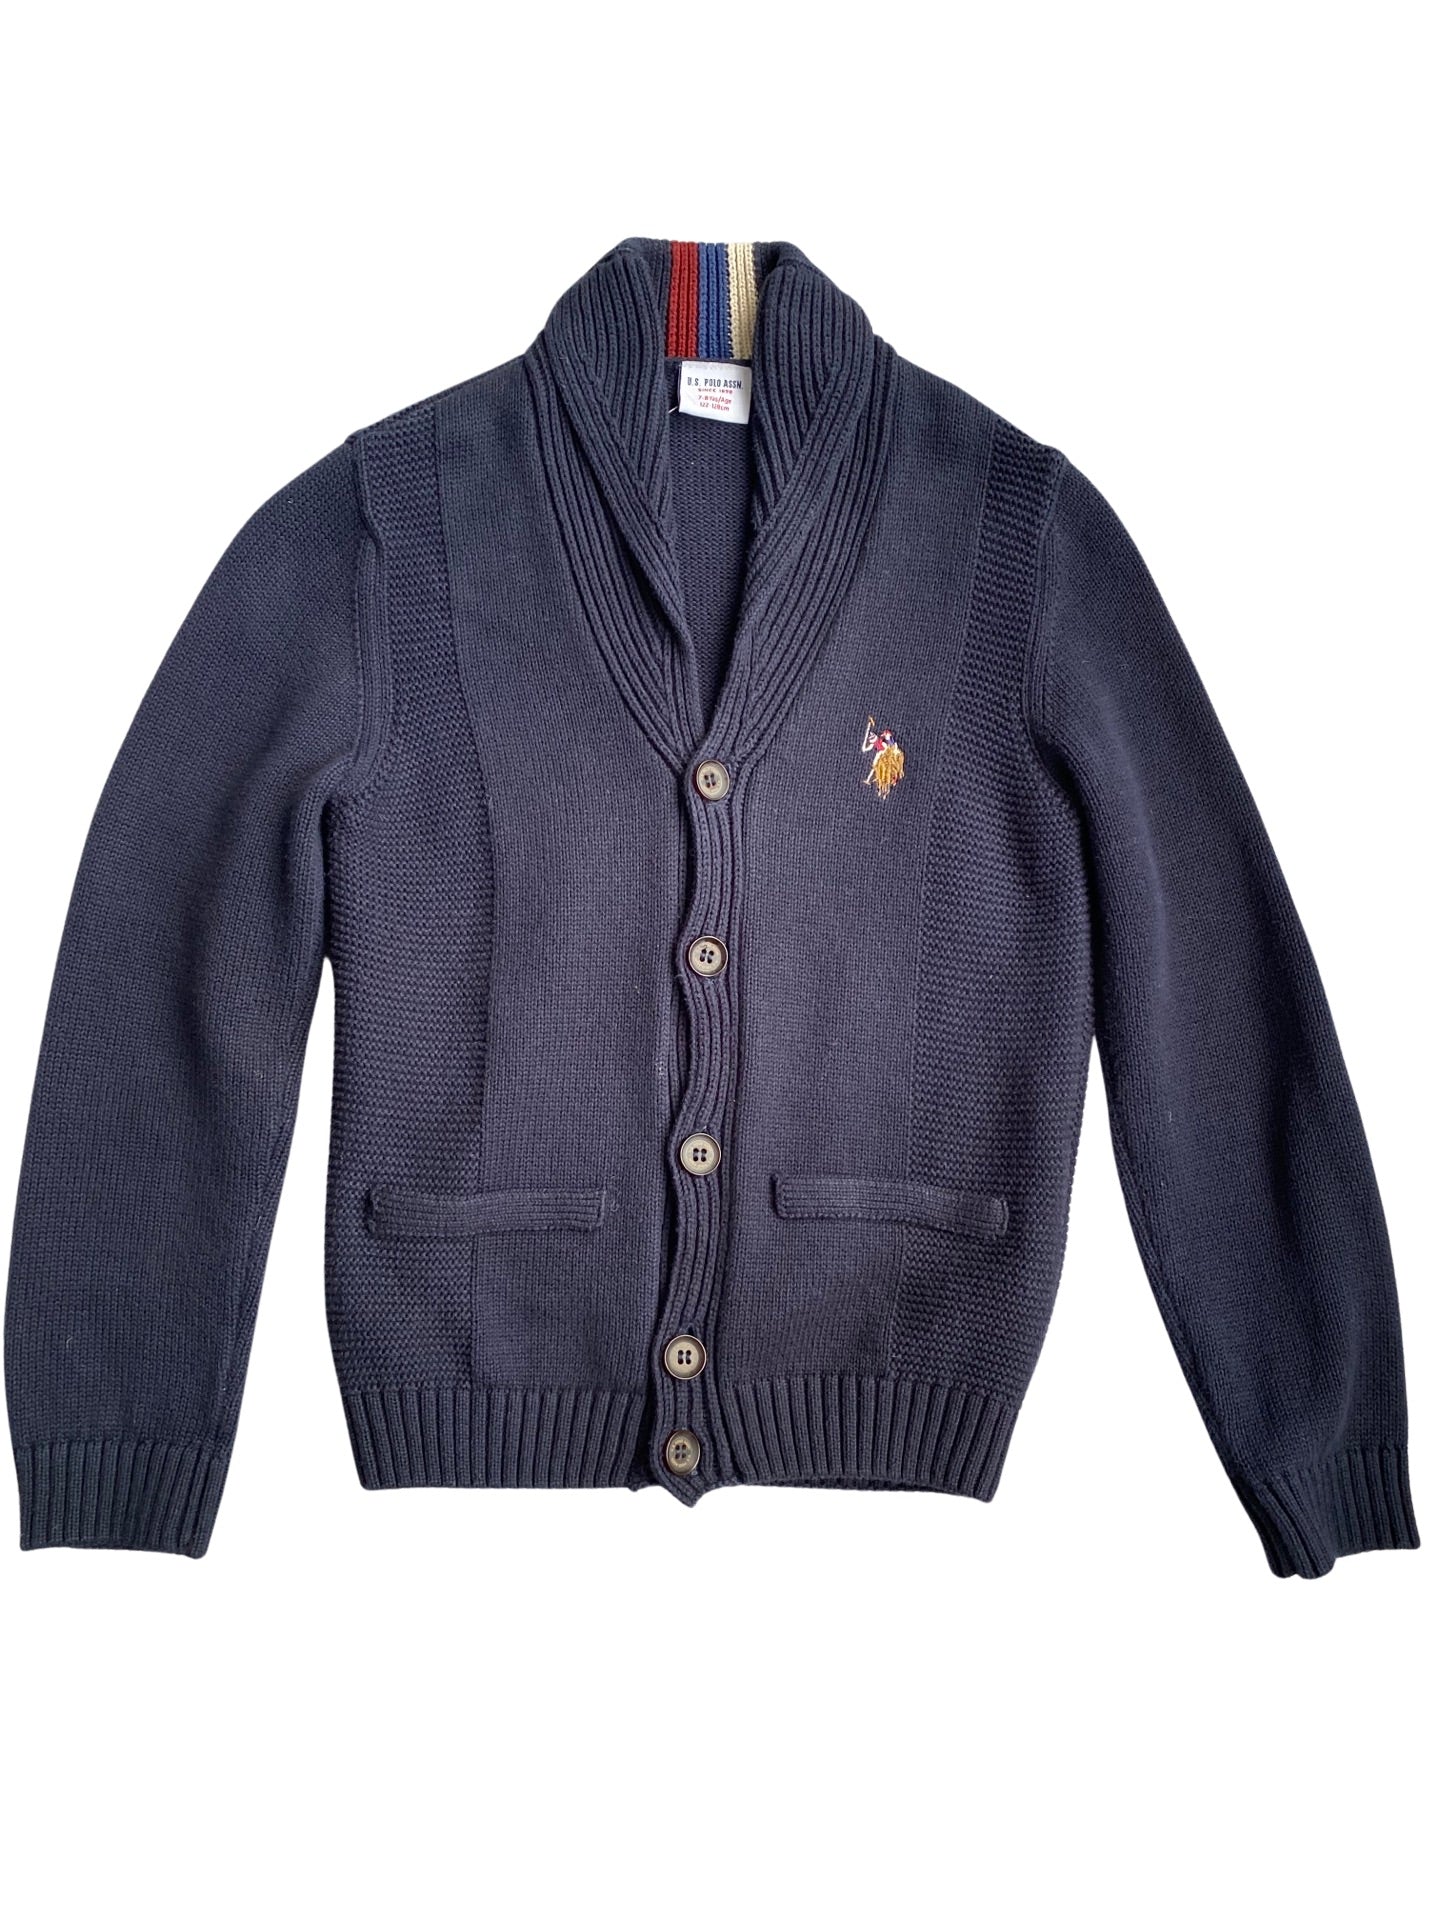 US Polo Association button down navy cardigan with striped collar (7-8yrs)